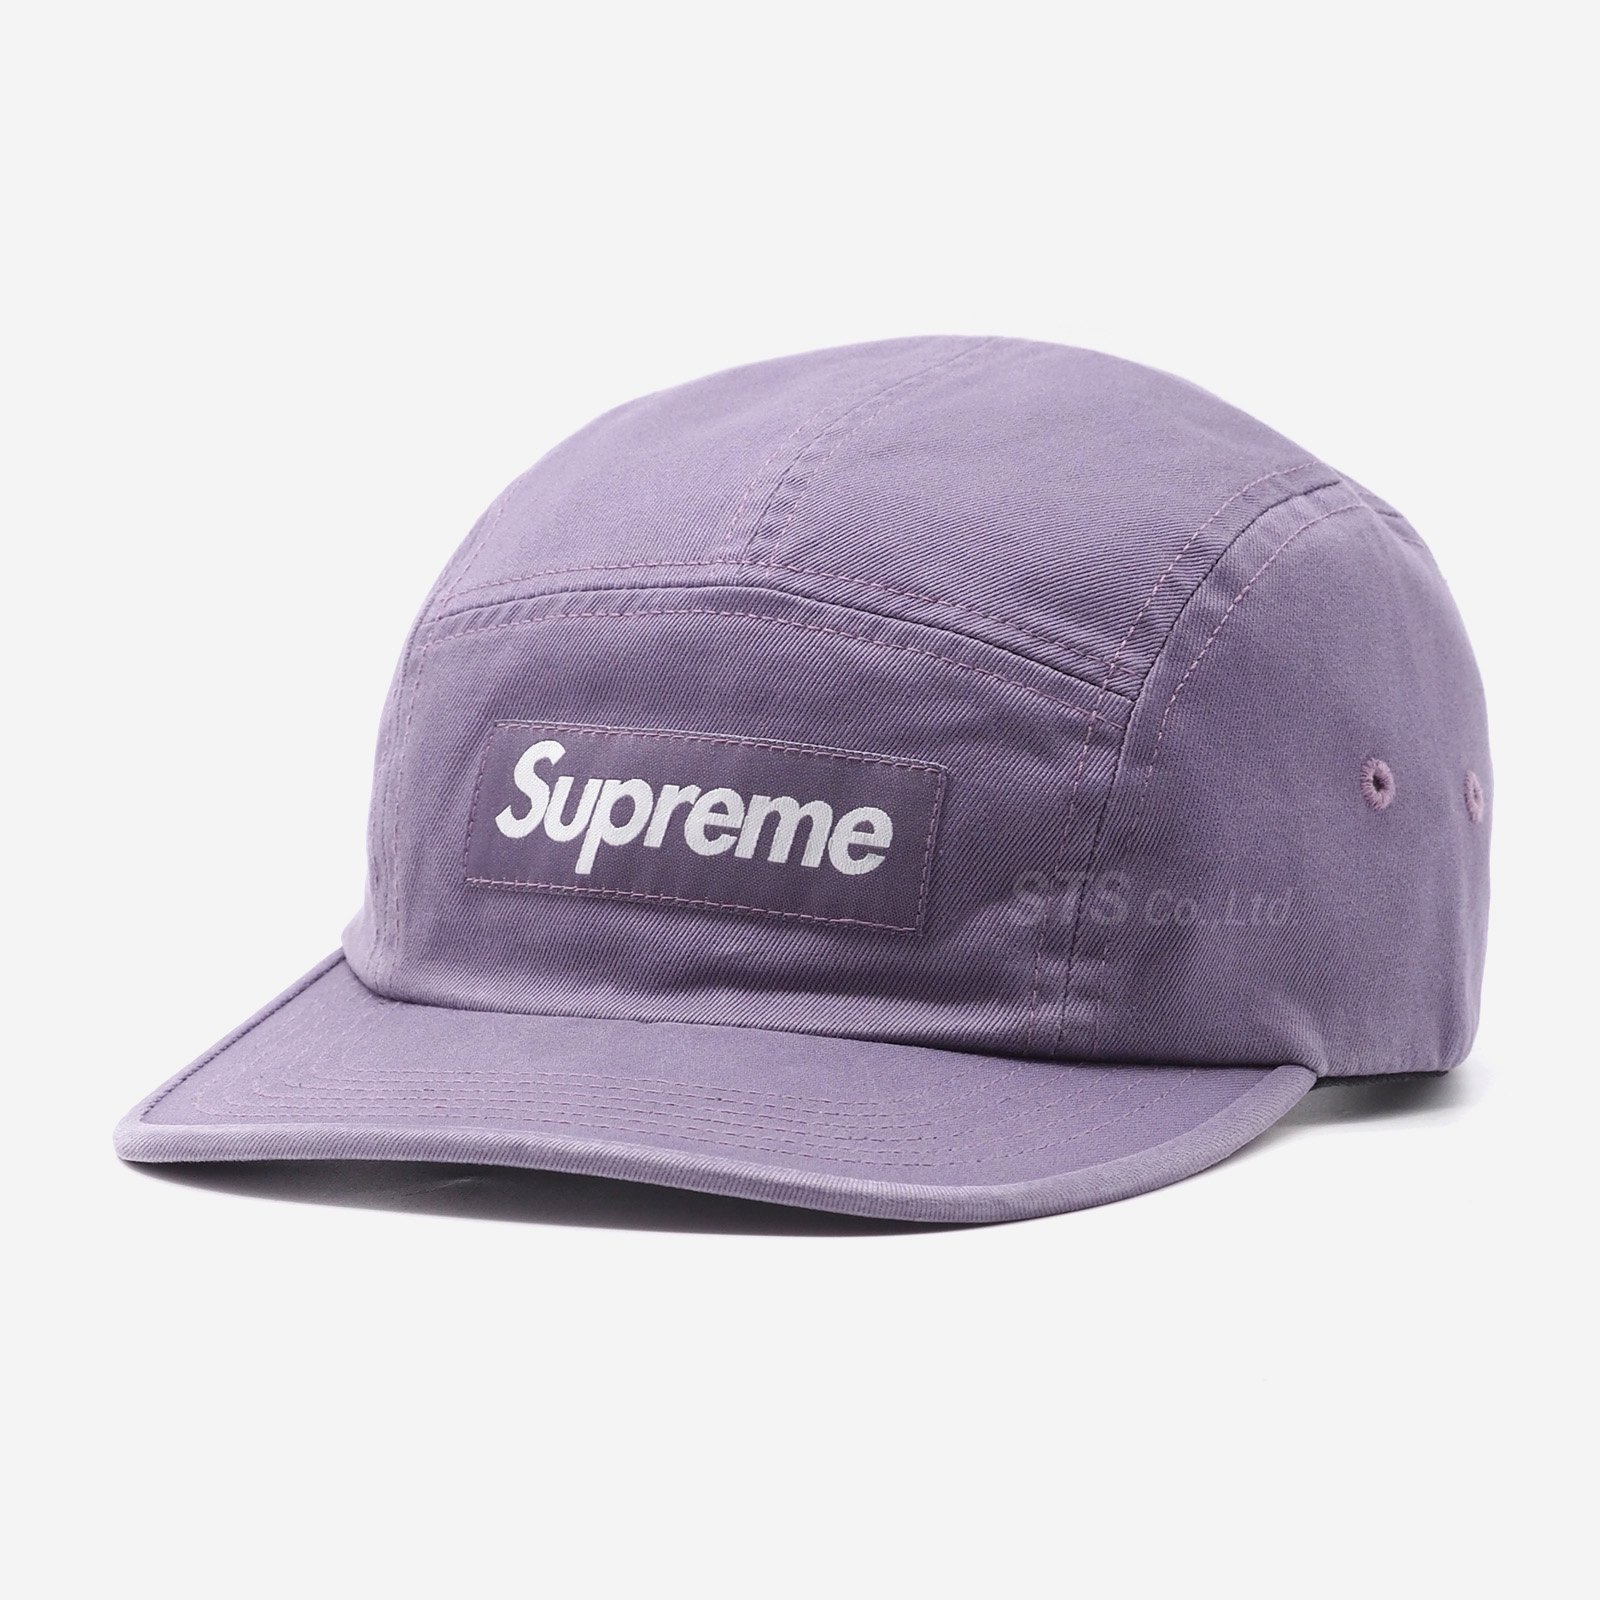 Supreme - Washed Chino Twill Camp Cap | チノツイル素材のキャンプ